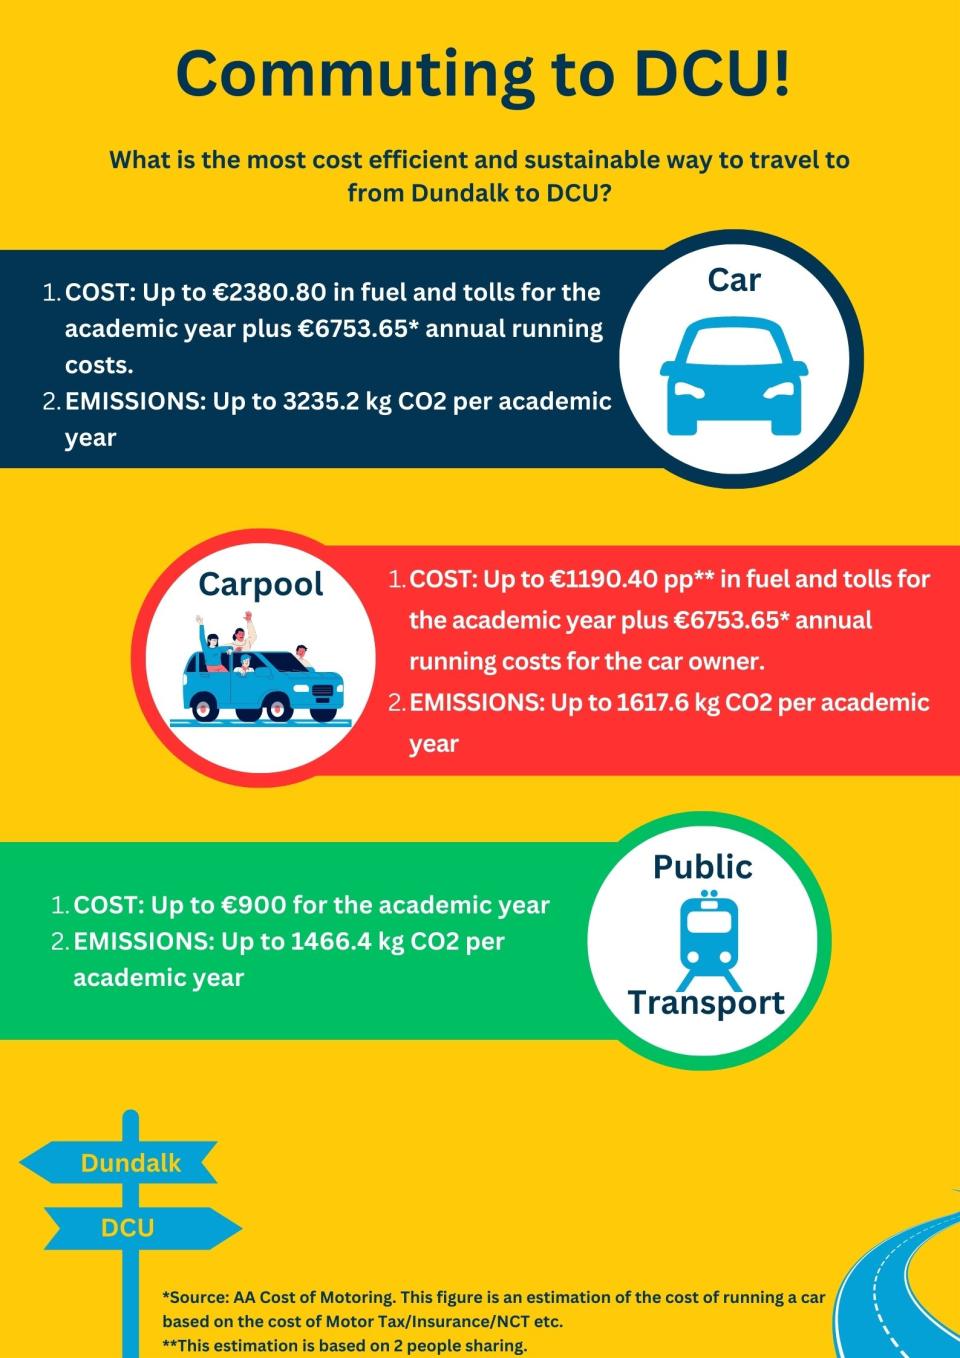 Comparison of cost and emissions associated with travelling to DCU throughout academic year via different transport modes. Car - €2380.80 in fuel and tolls, 3235.2kg CO2 in emissions. Carpool - €1190 per person in fuel and tolls, 1617kg CO2 in emissions.  Public Transport - €900 in fares, 1466kg CO2 in emissions.